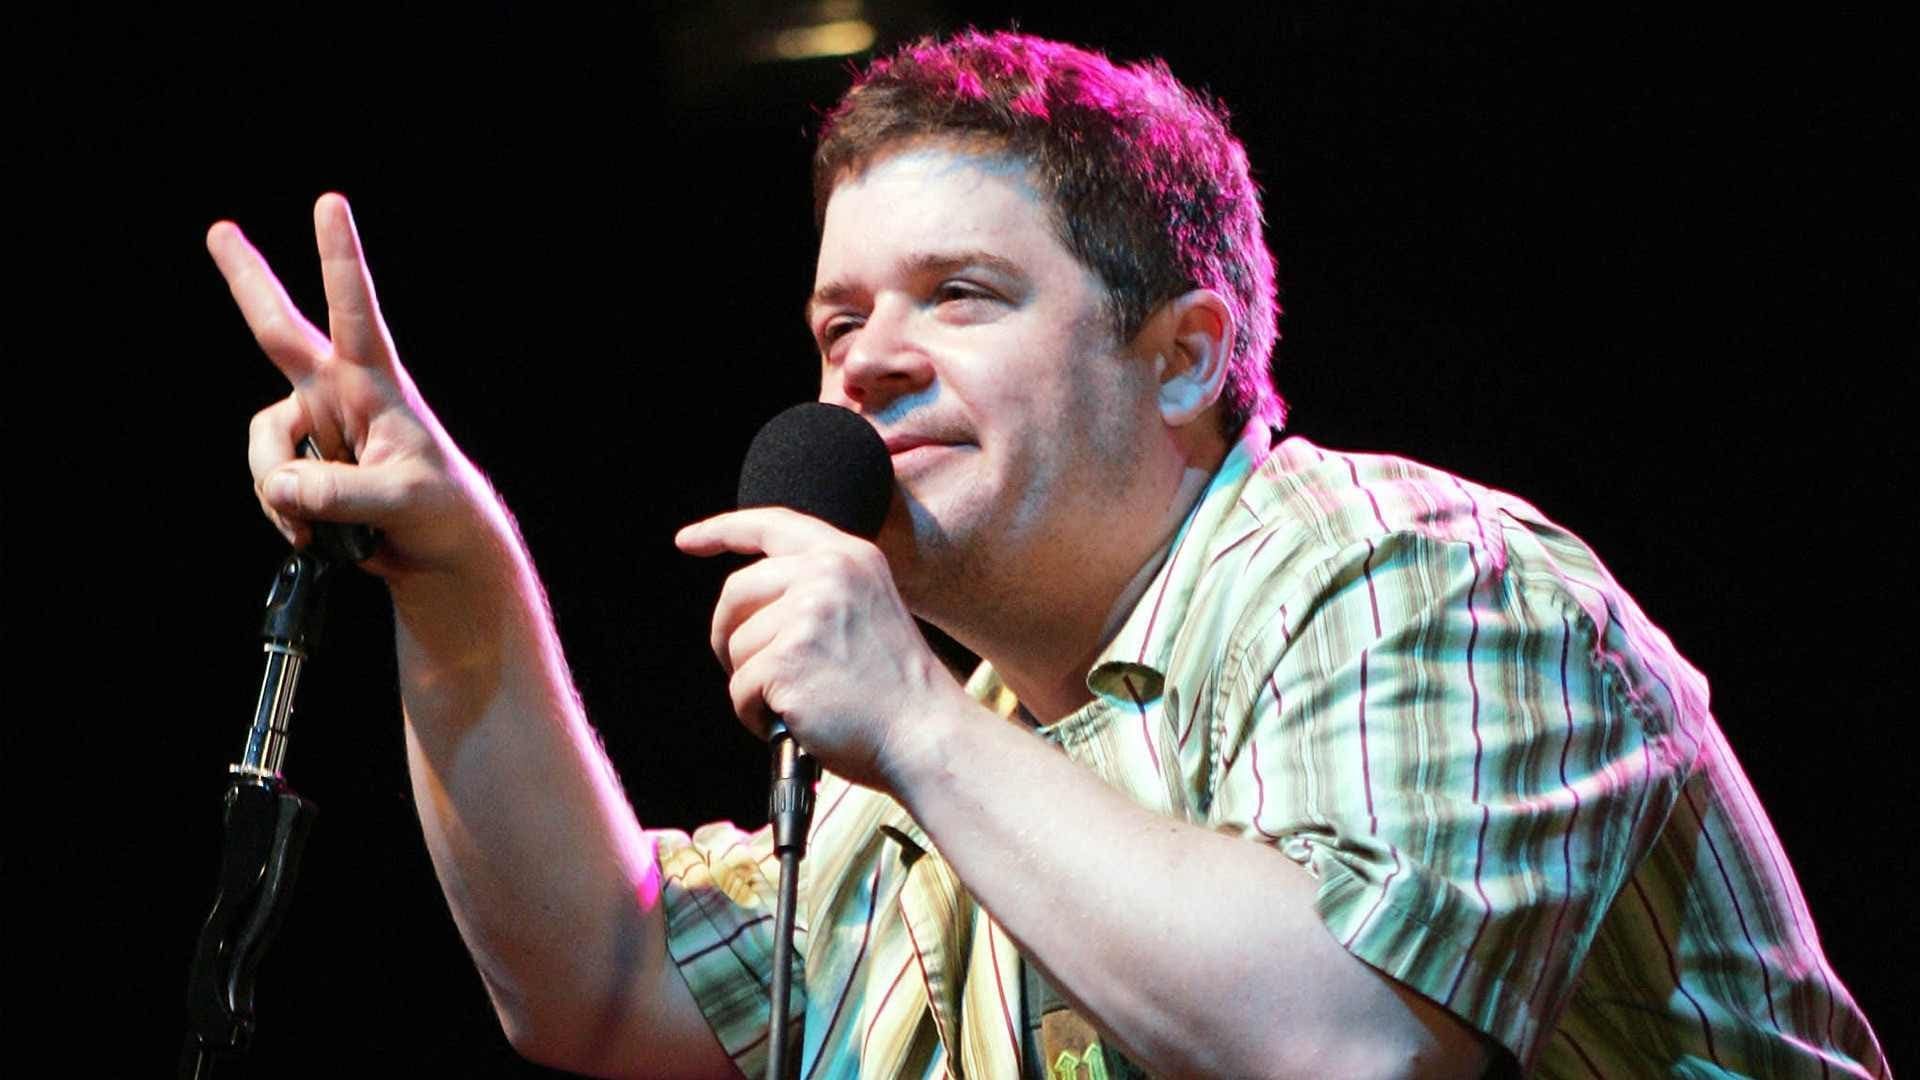 Patton Oswalt: My Weakness Is Strong background